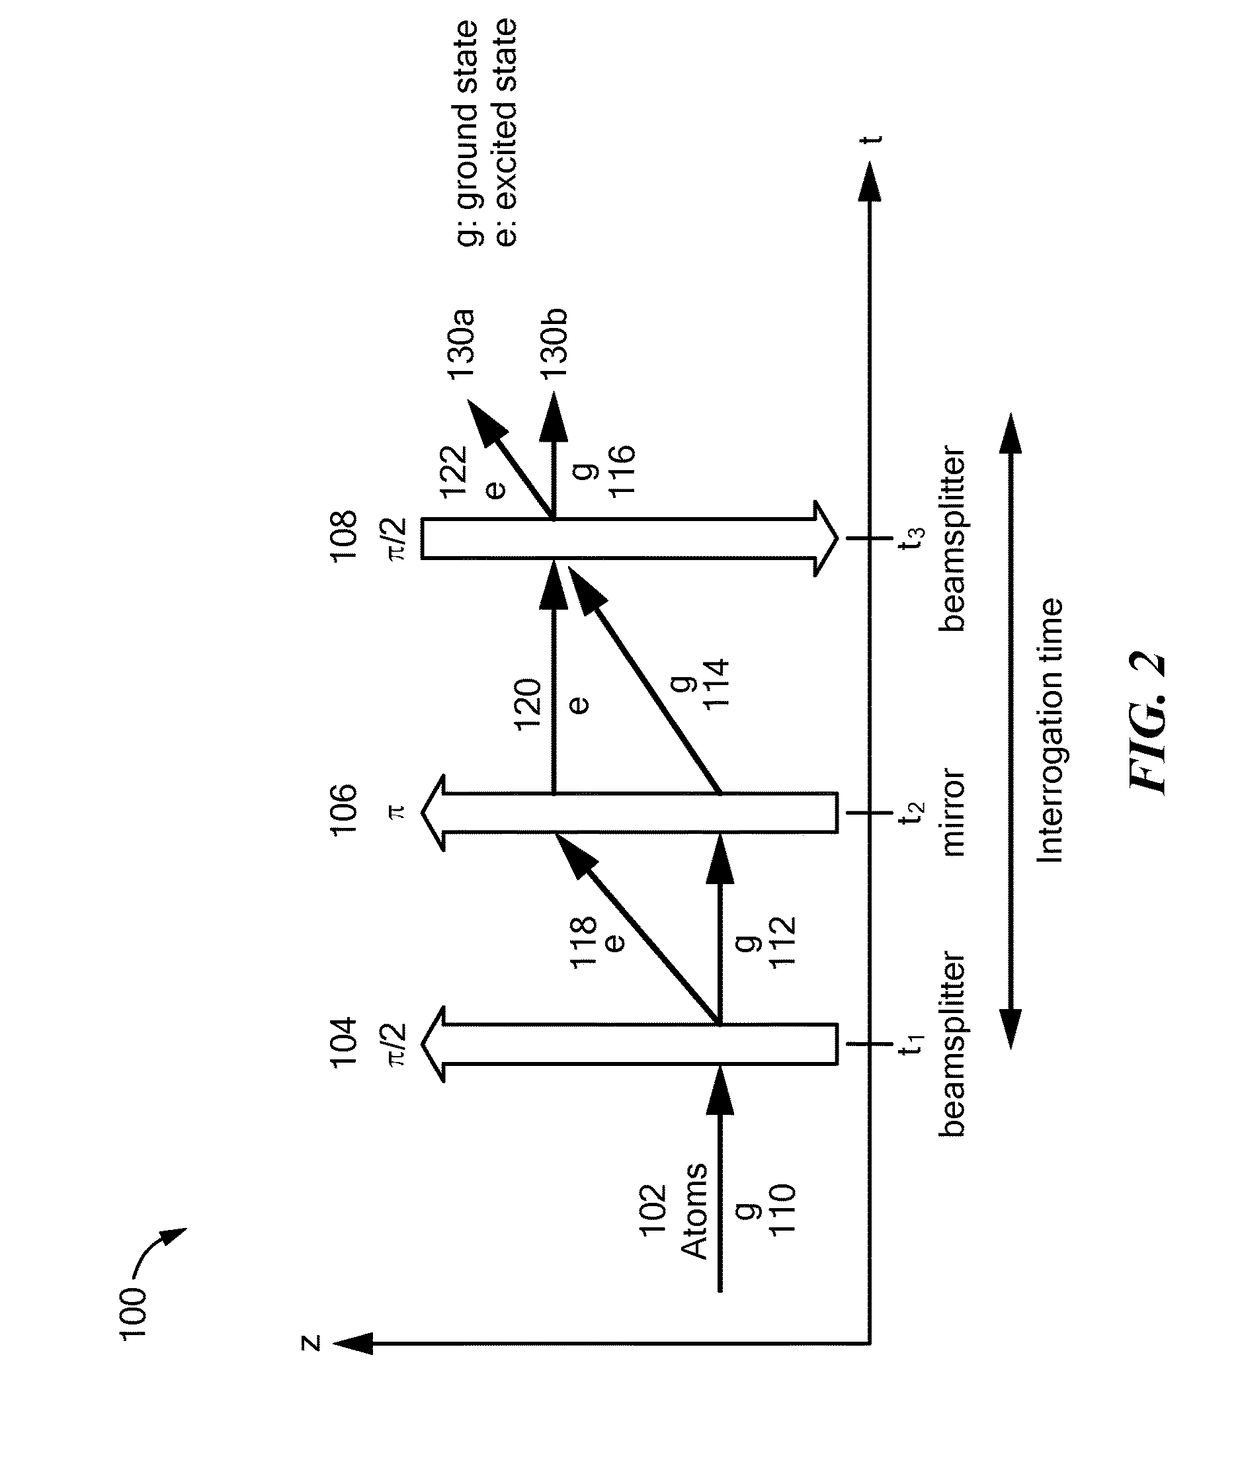 Separated Parallel Beam Generation for Atom Interferometry